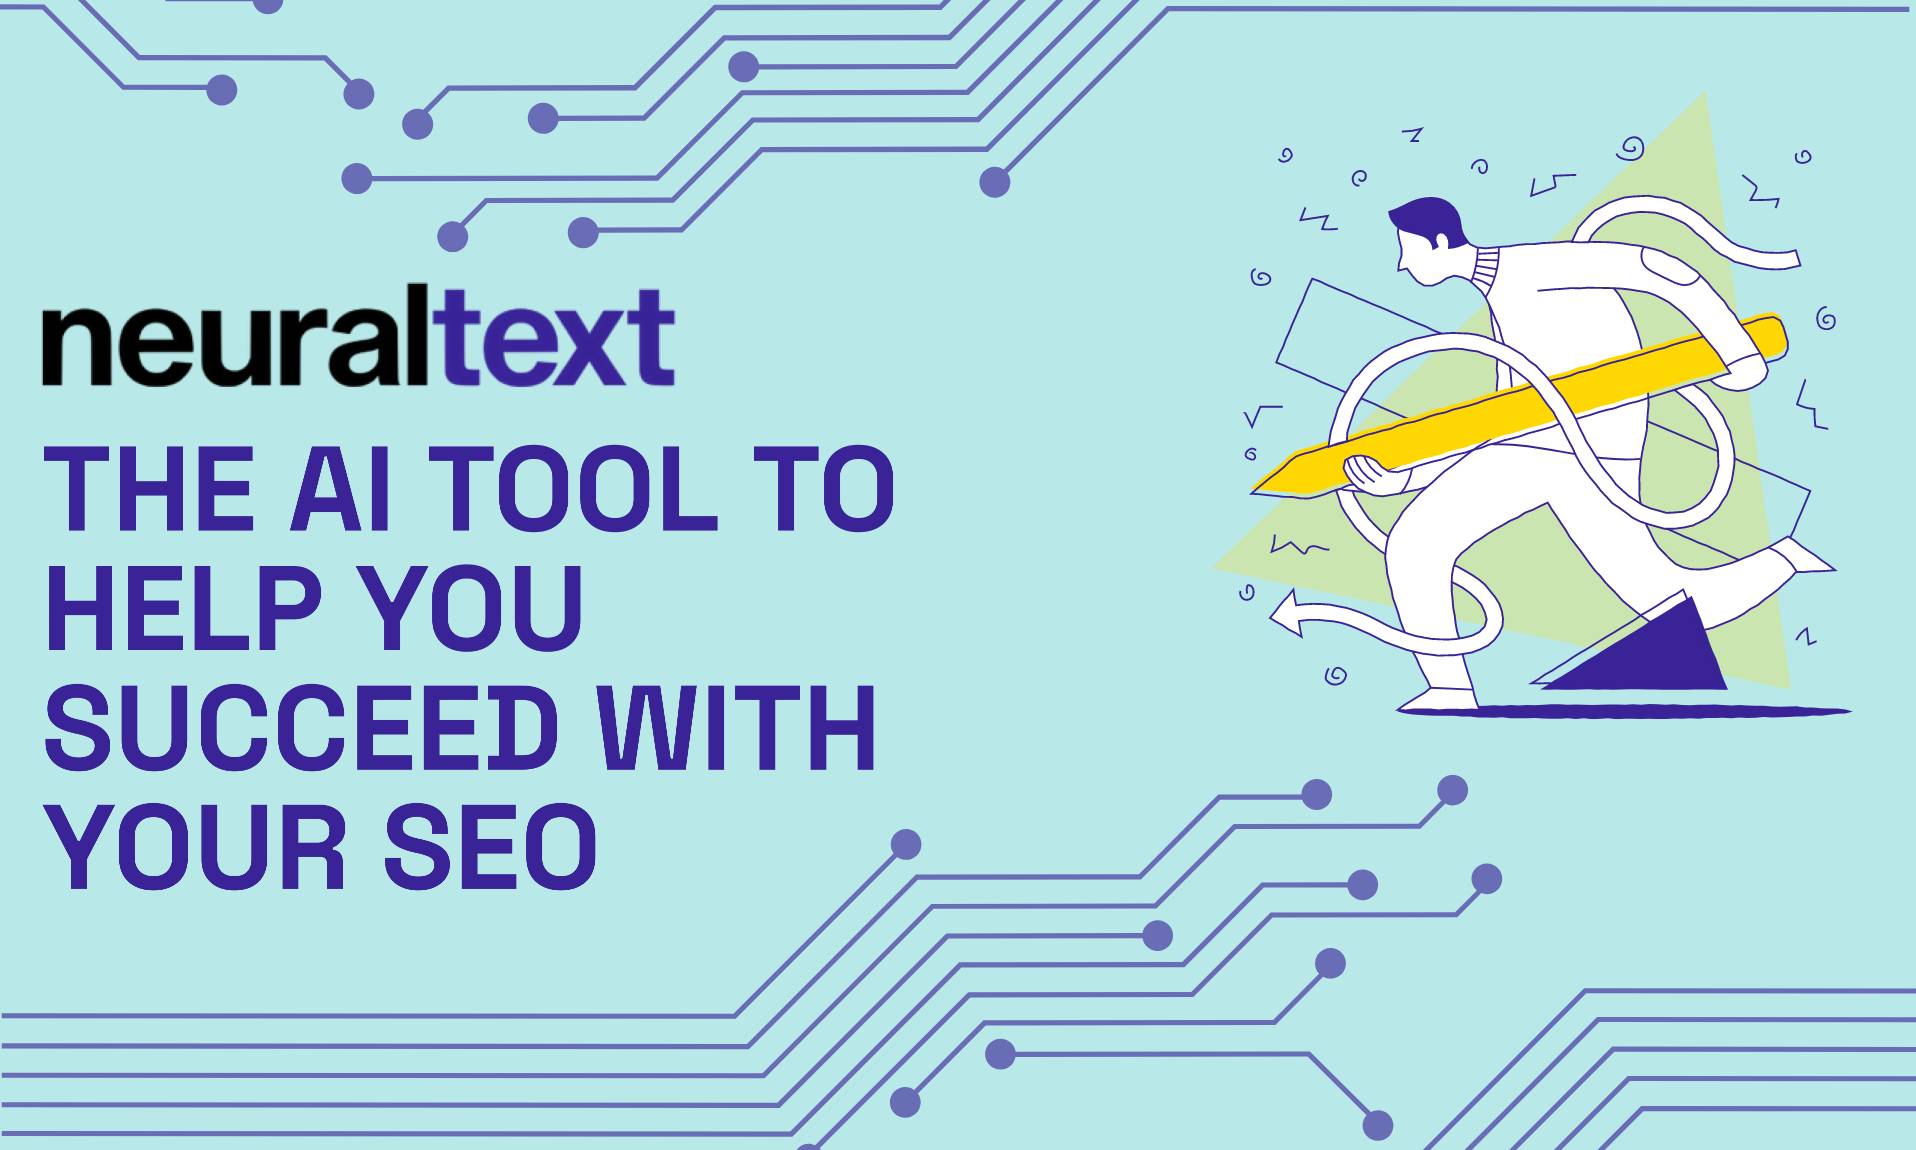 Neuraltext - The AI tool to help you succeed with your SEO